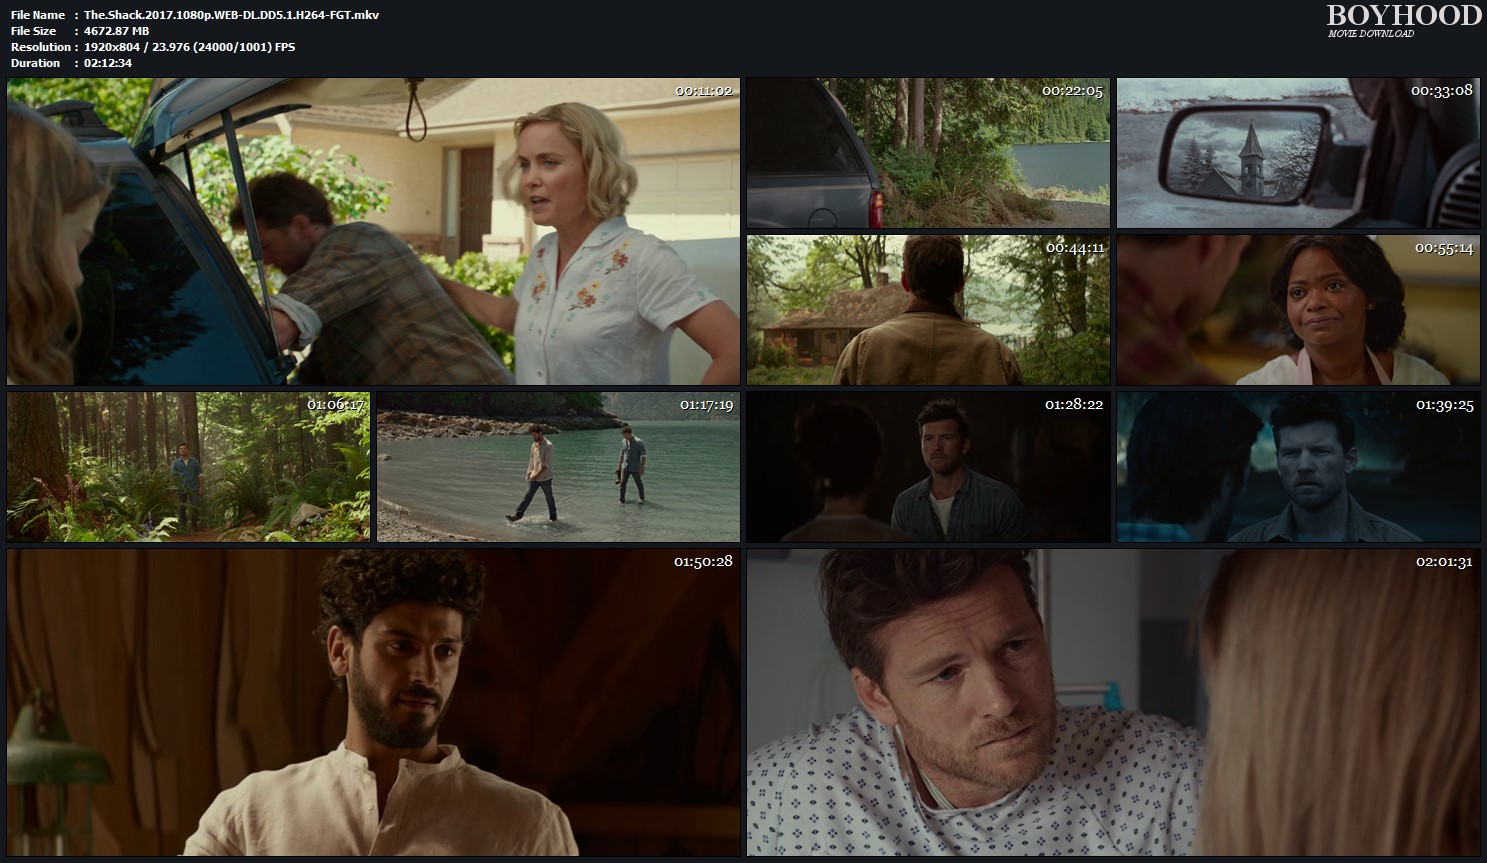 the shack download